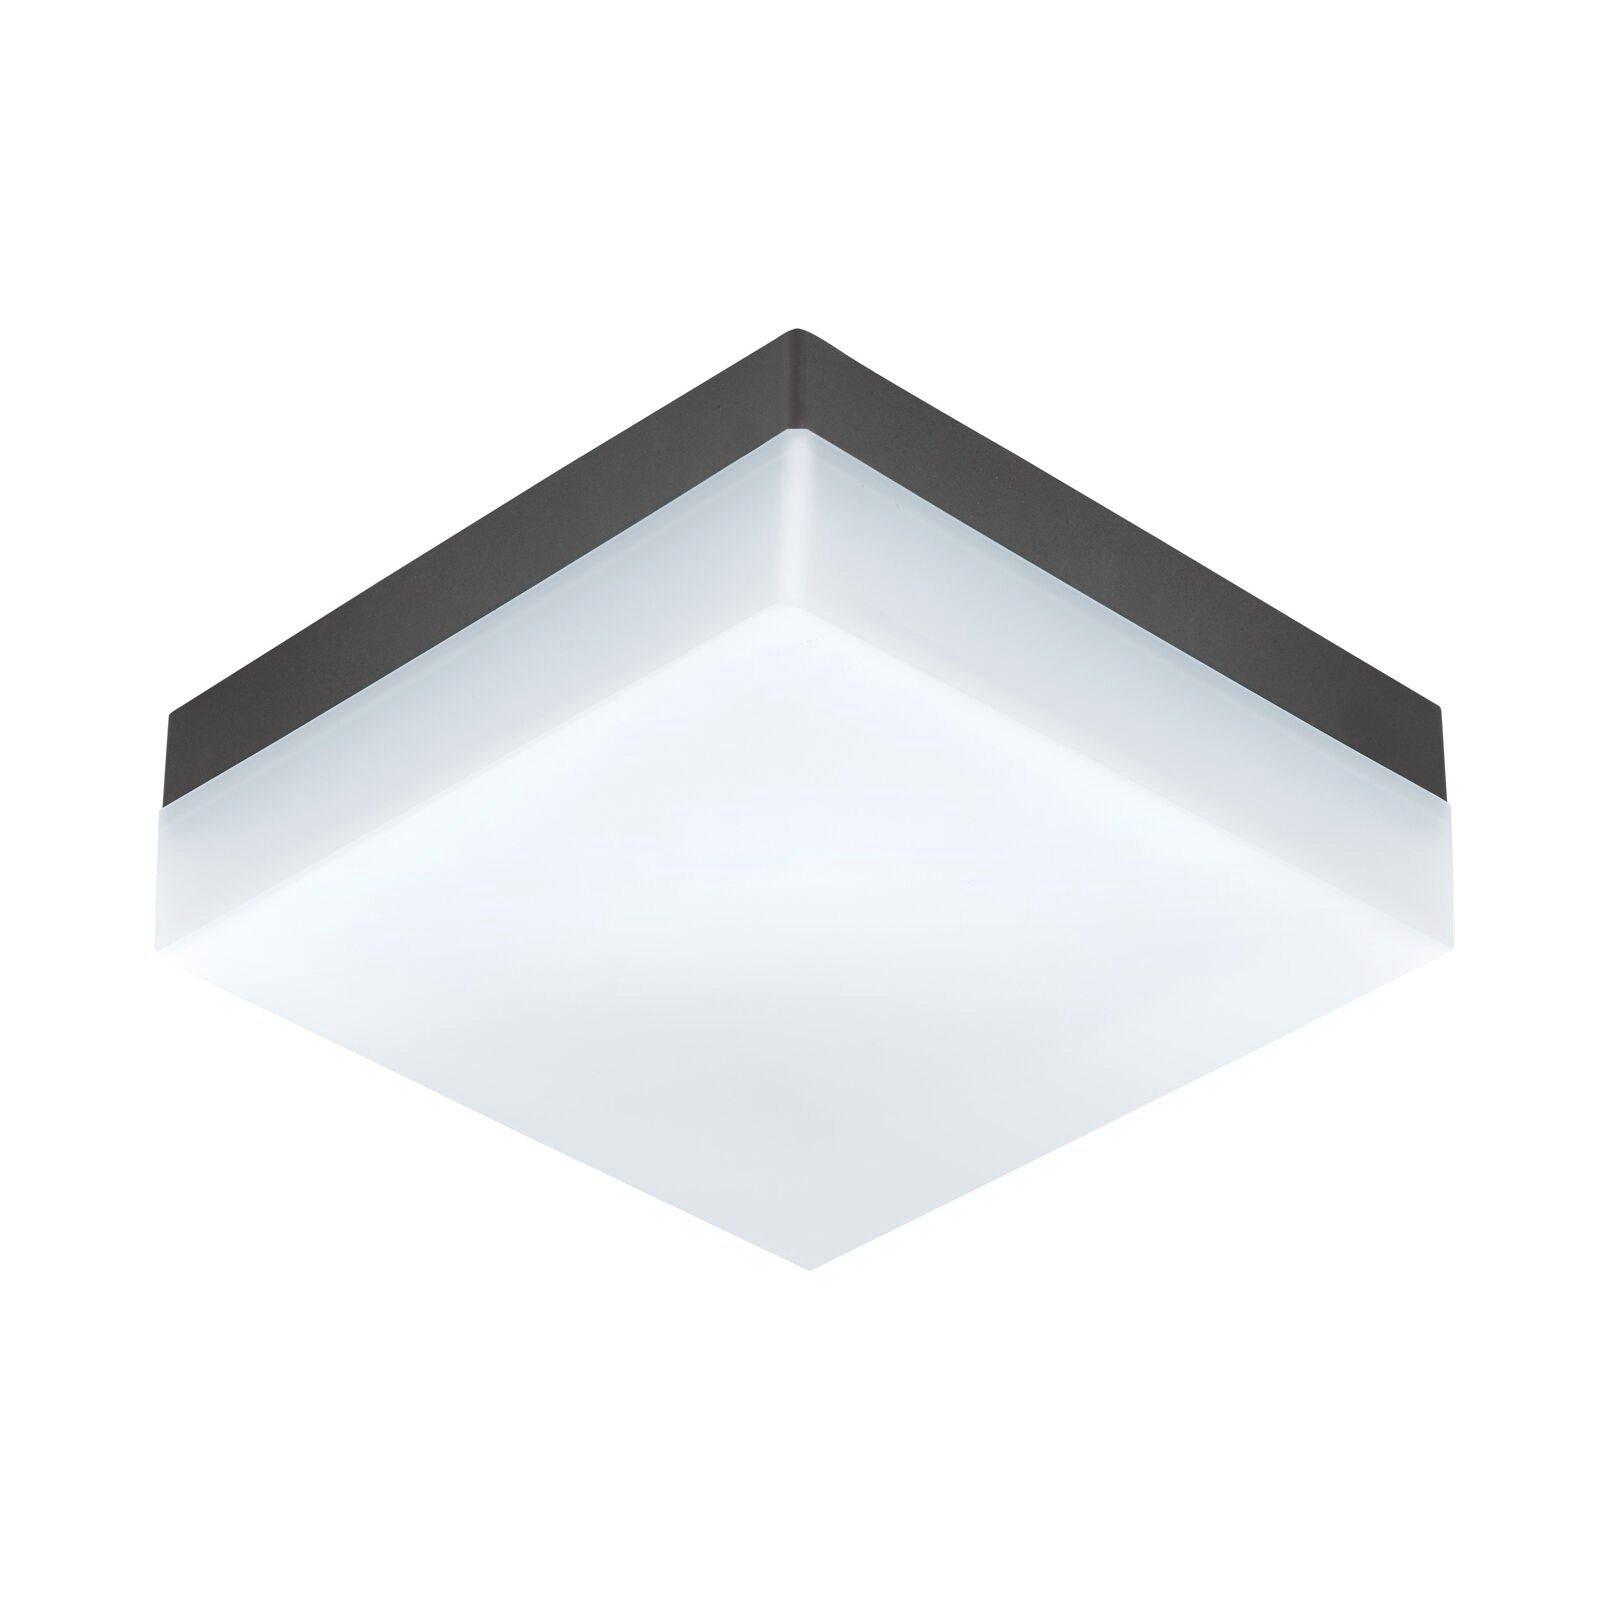 IP44 Outdoor Wall Light Anthracite Plastic 8.2W Built in LED Porch Lamp